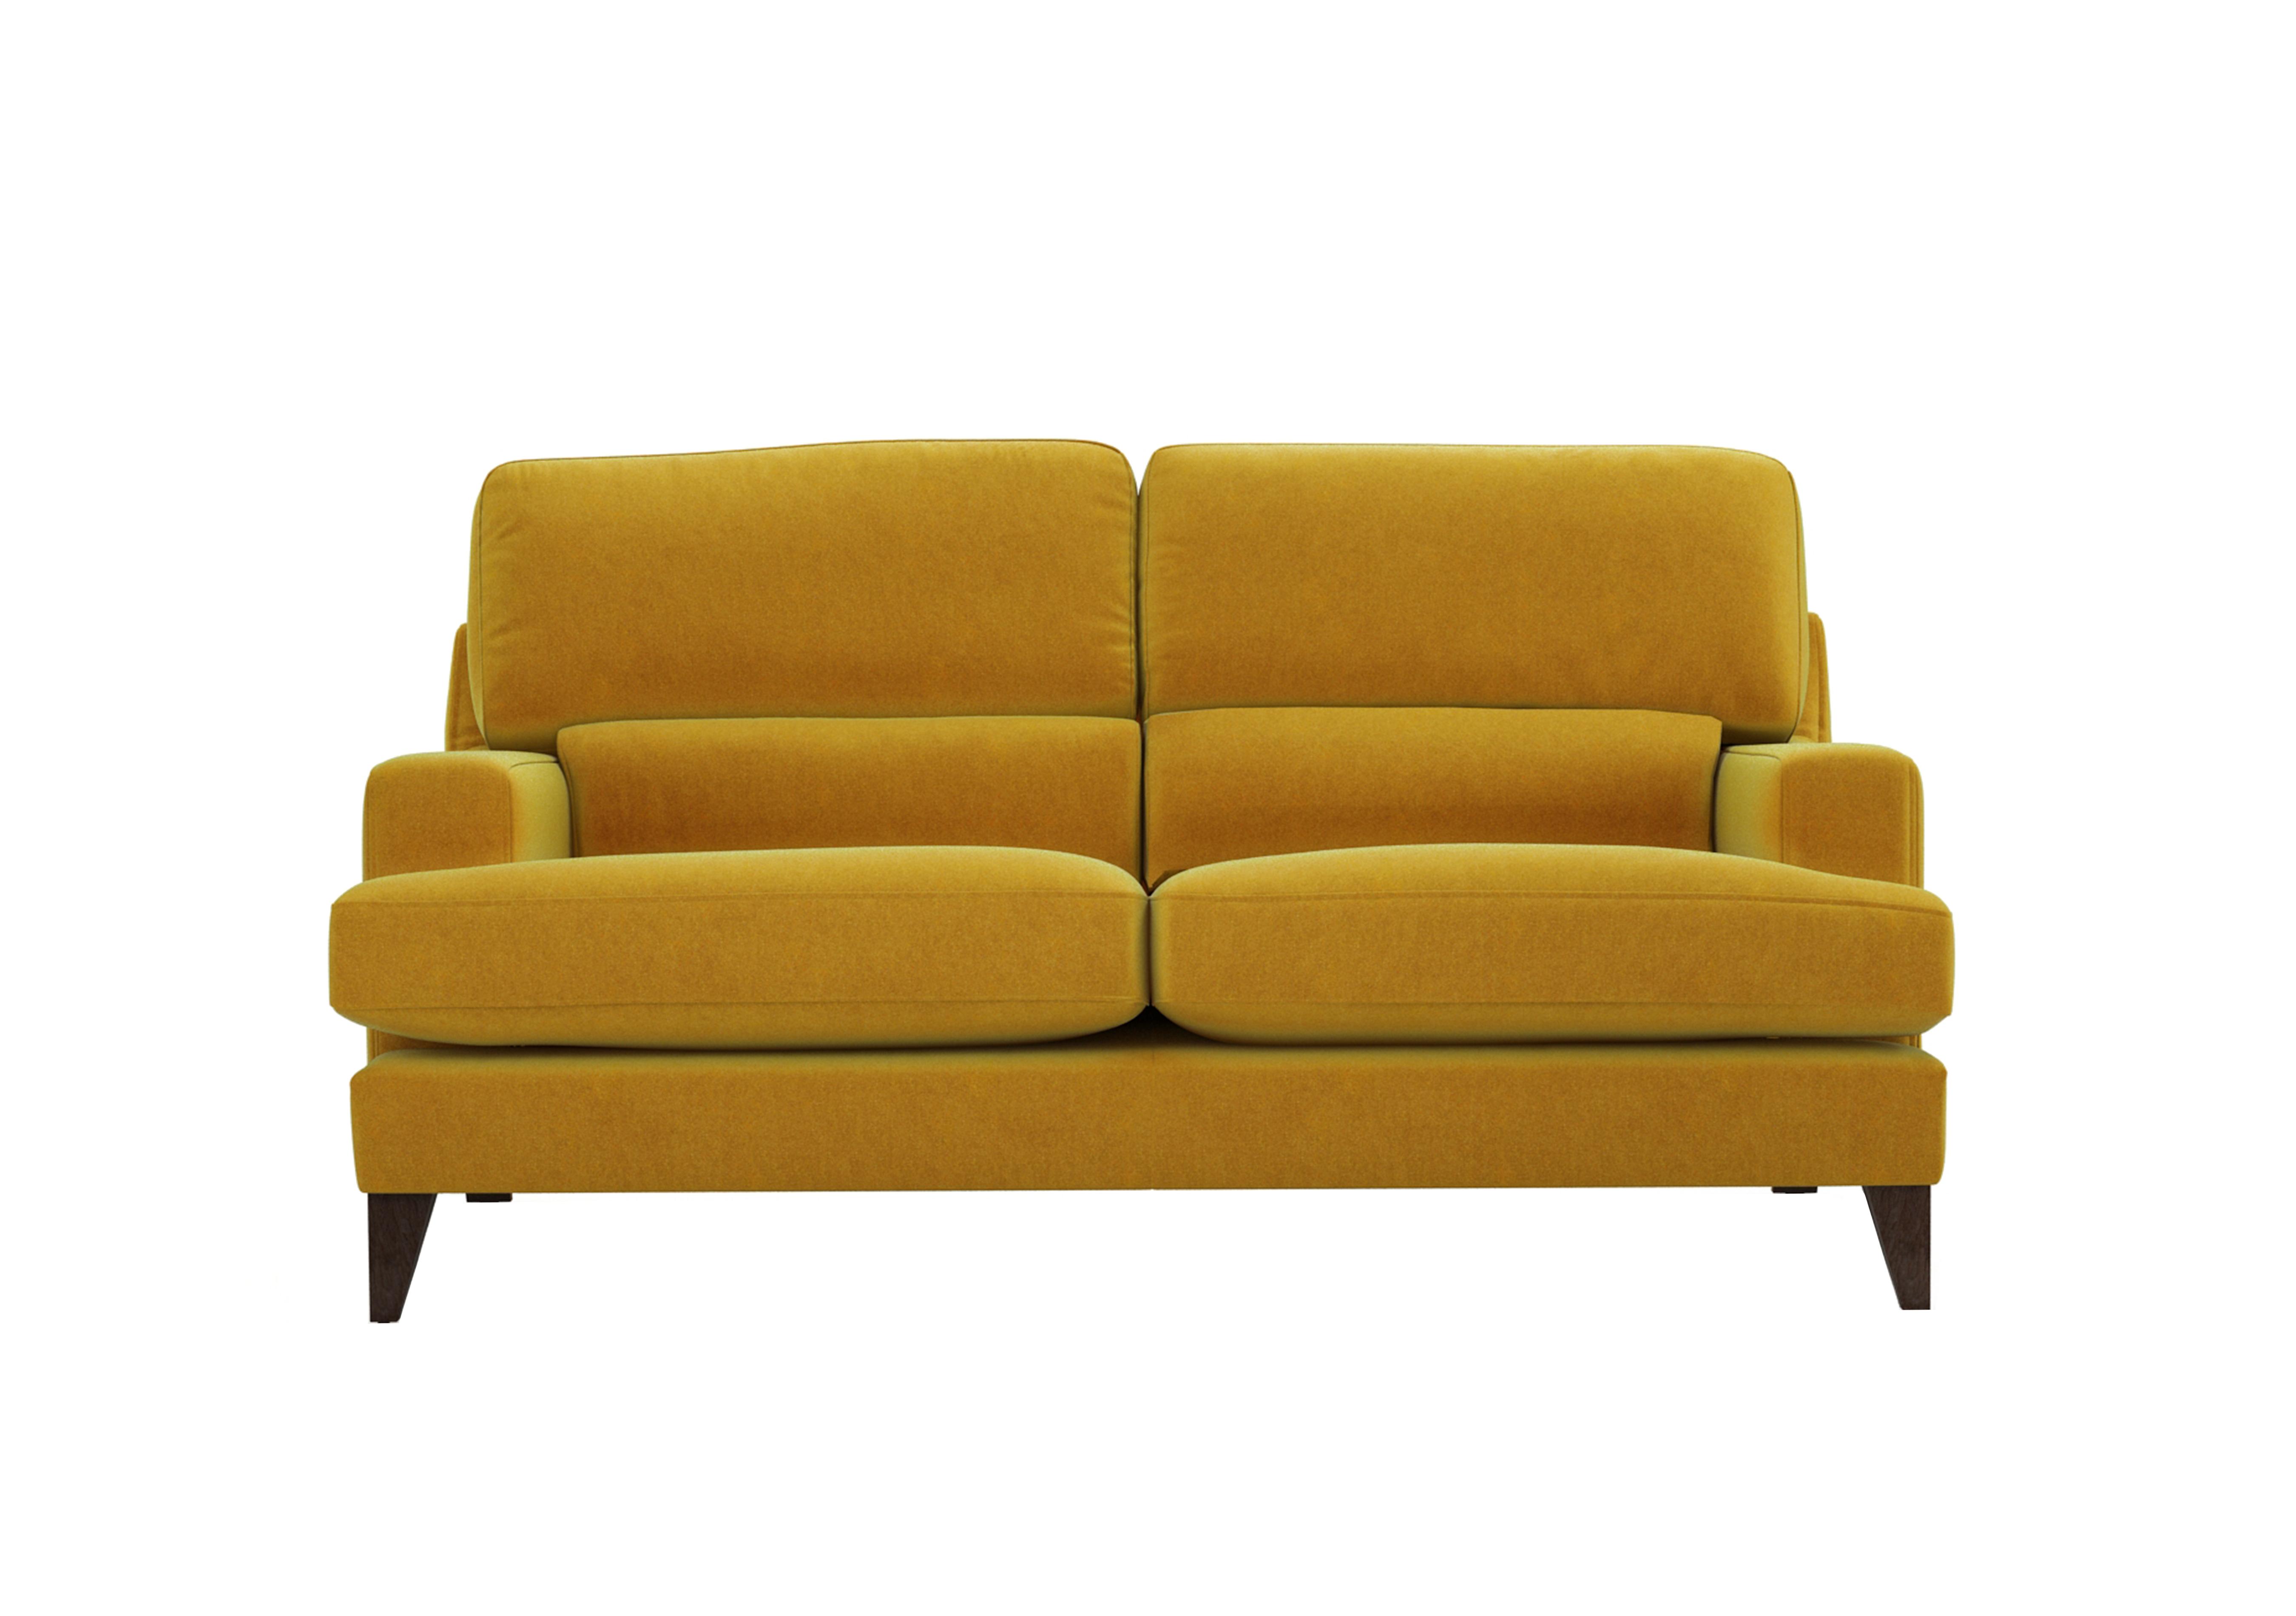 Romilly 2.5 Seater Fabric Sofa in Gol204 Golden Spice Wa Ft on Furniture Village